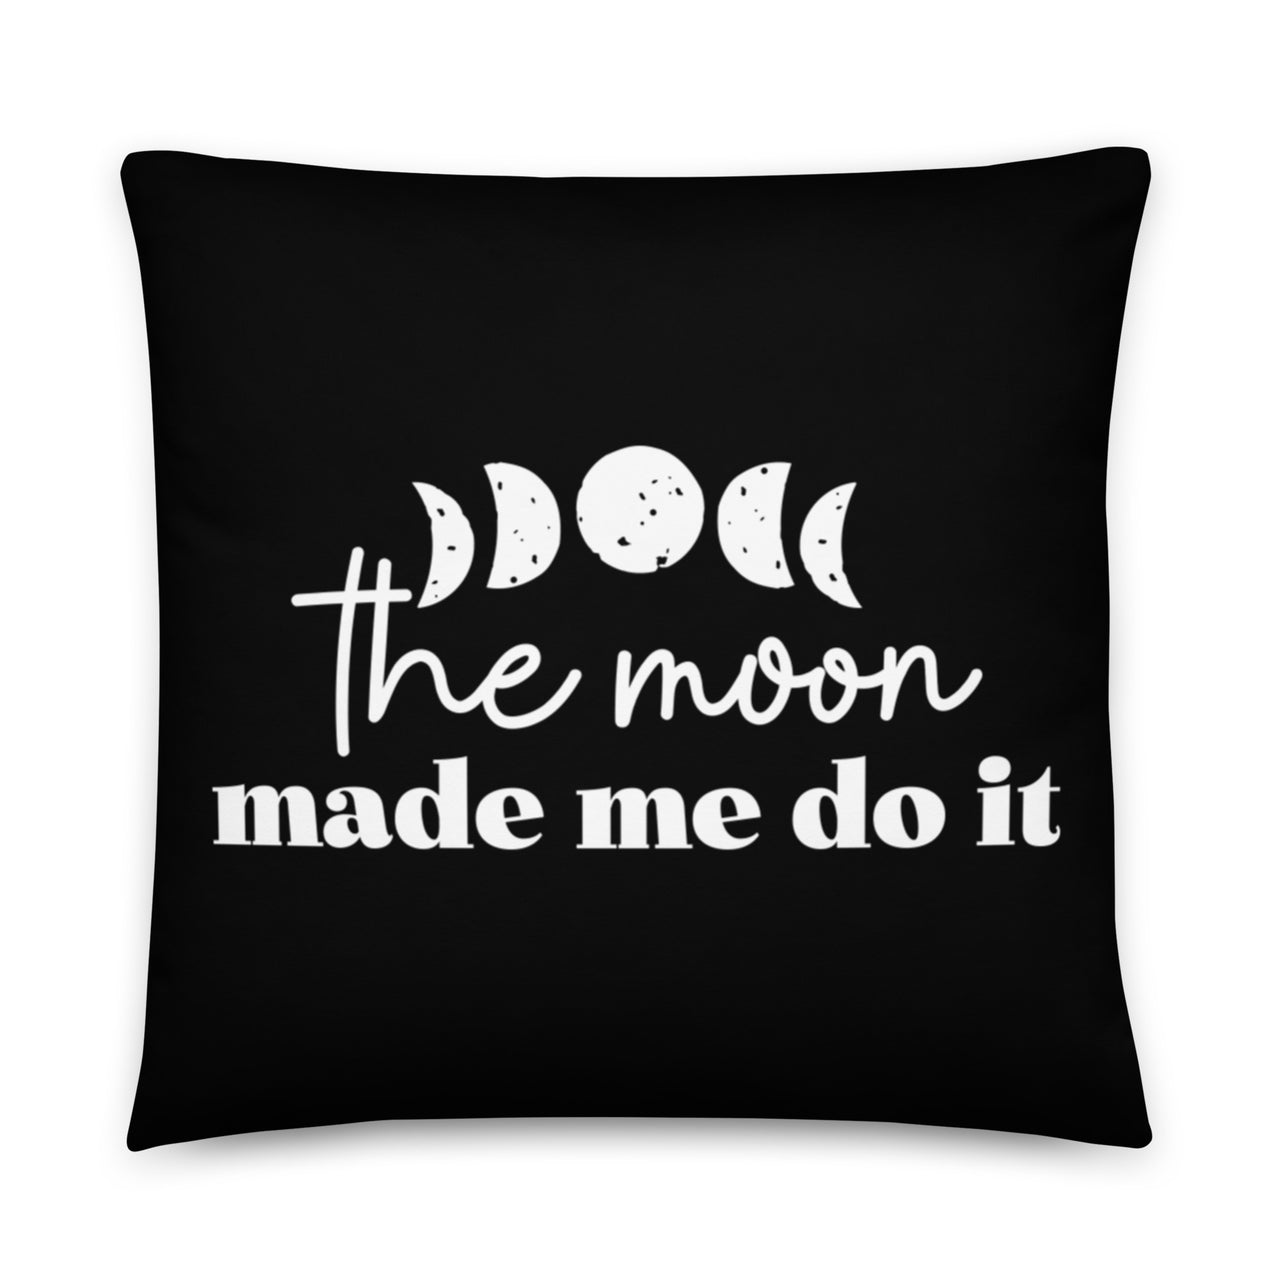 The Moon Made Me Do It Pillow